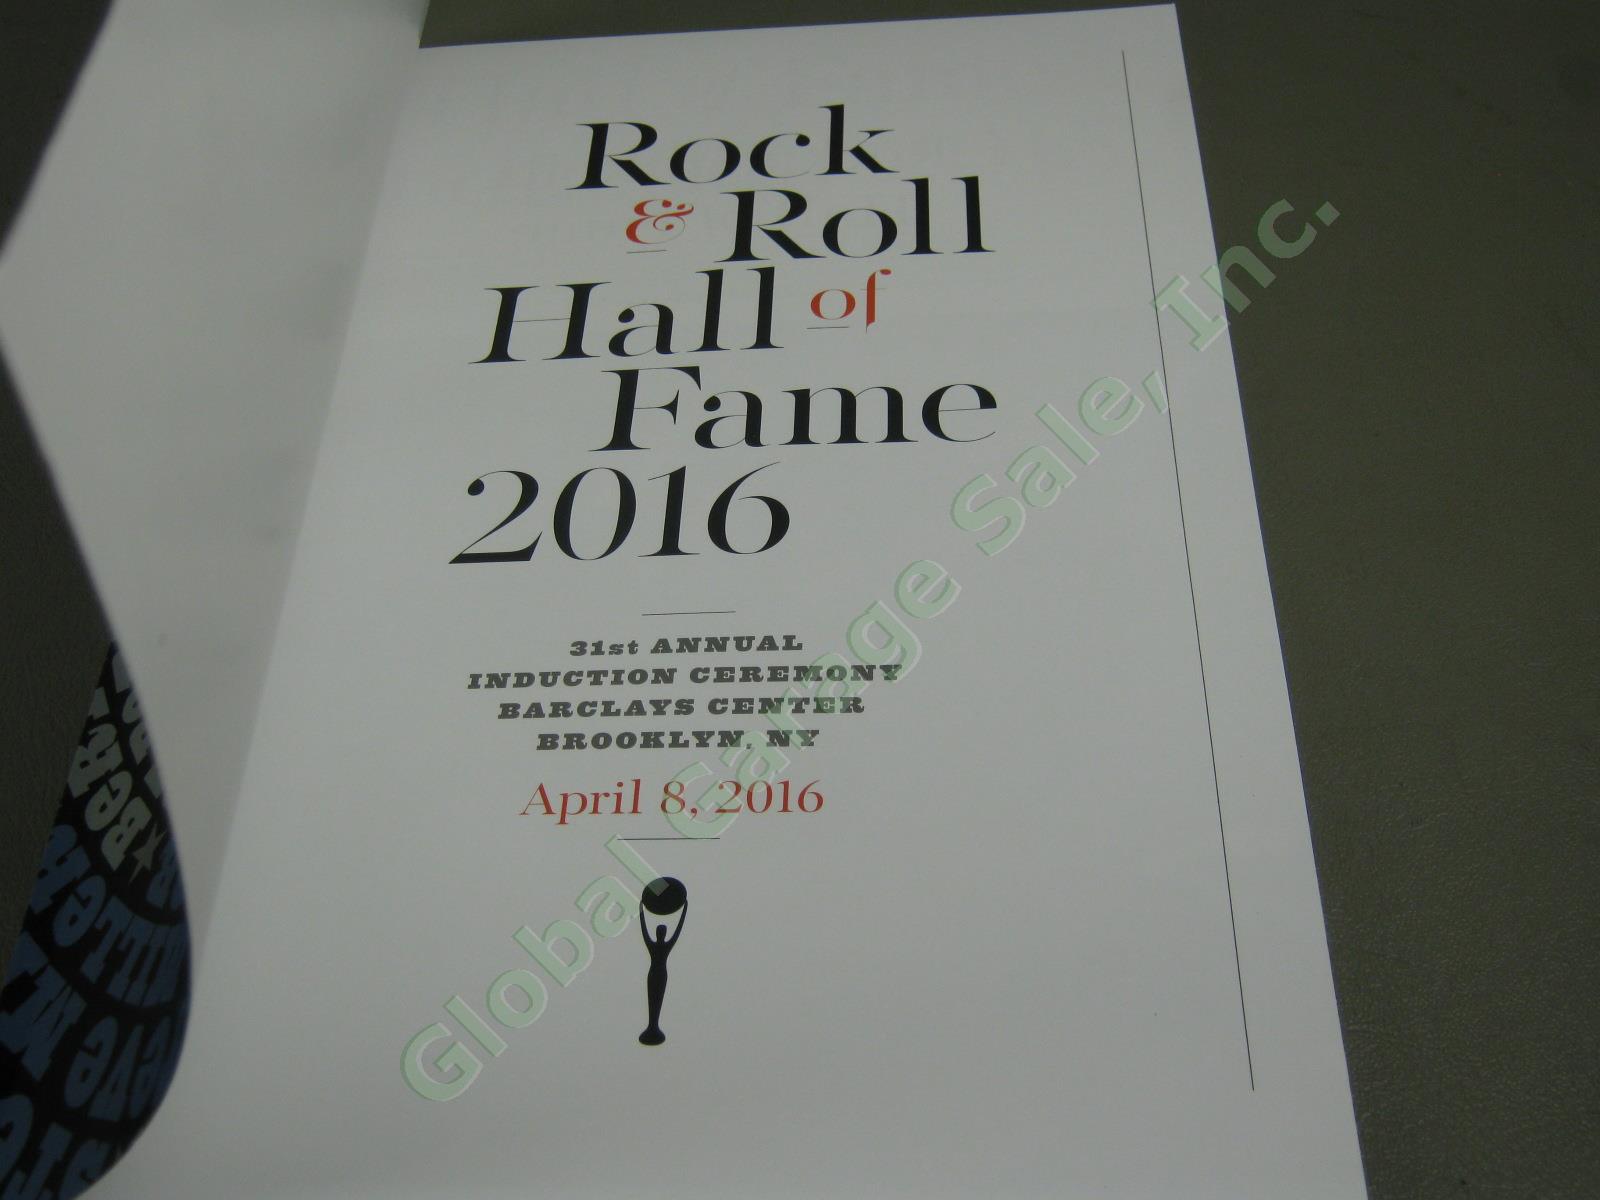 2016 Rock & Roll Hall Of Fame 31st Annual Induction Ceremony Program + Sealed CD 5